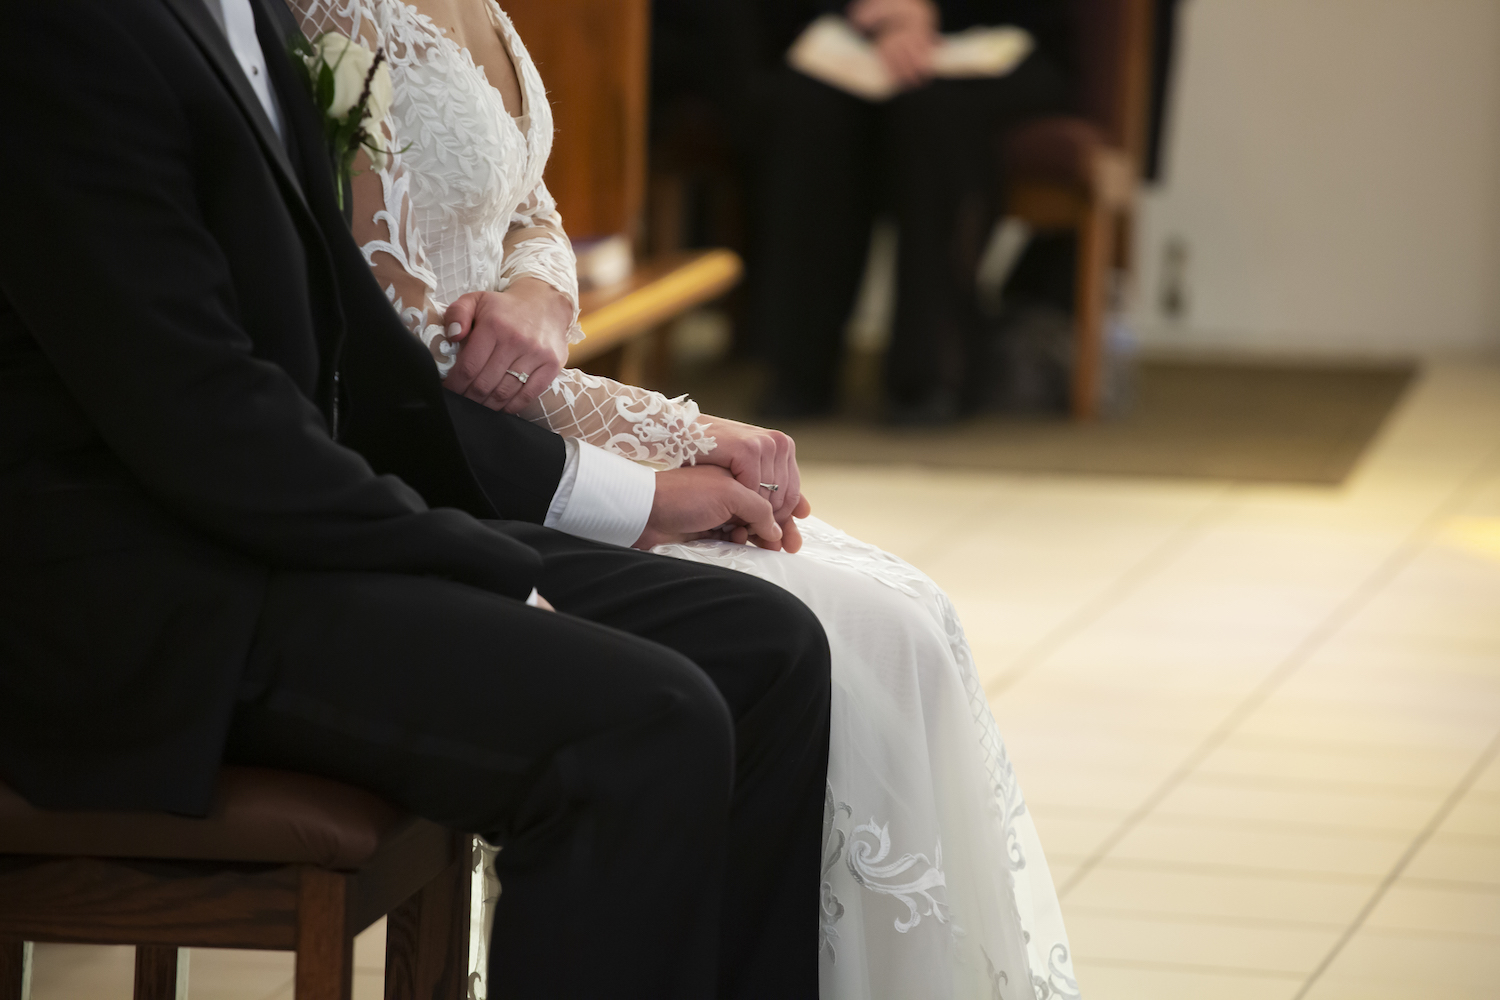 Bride and groom holding hands at alter